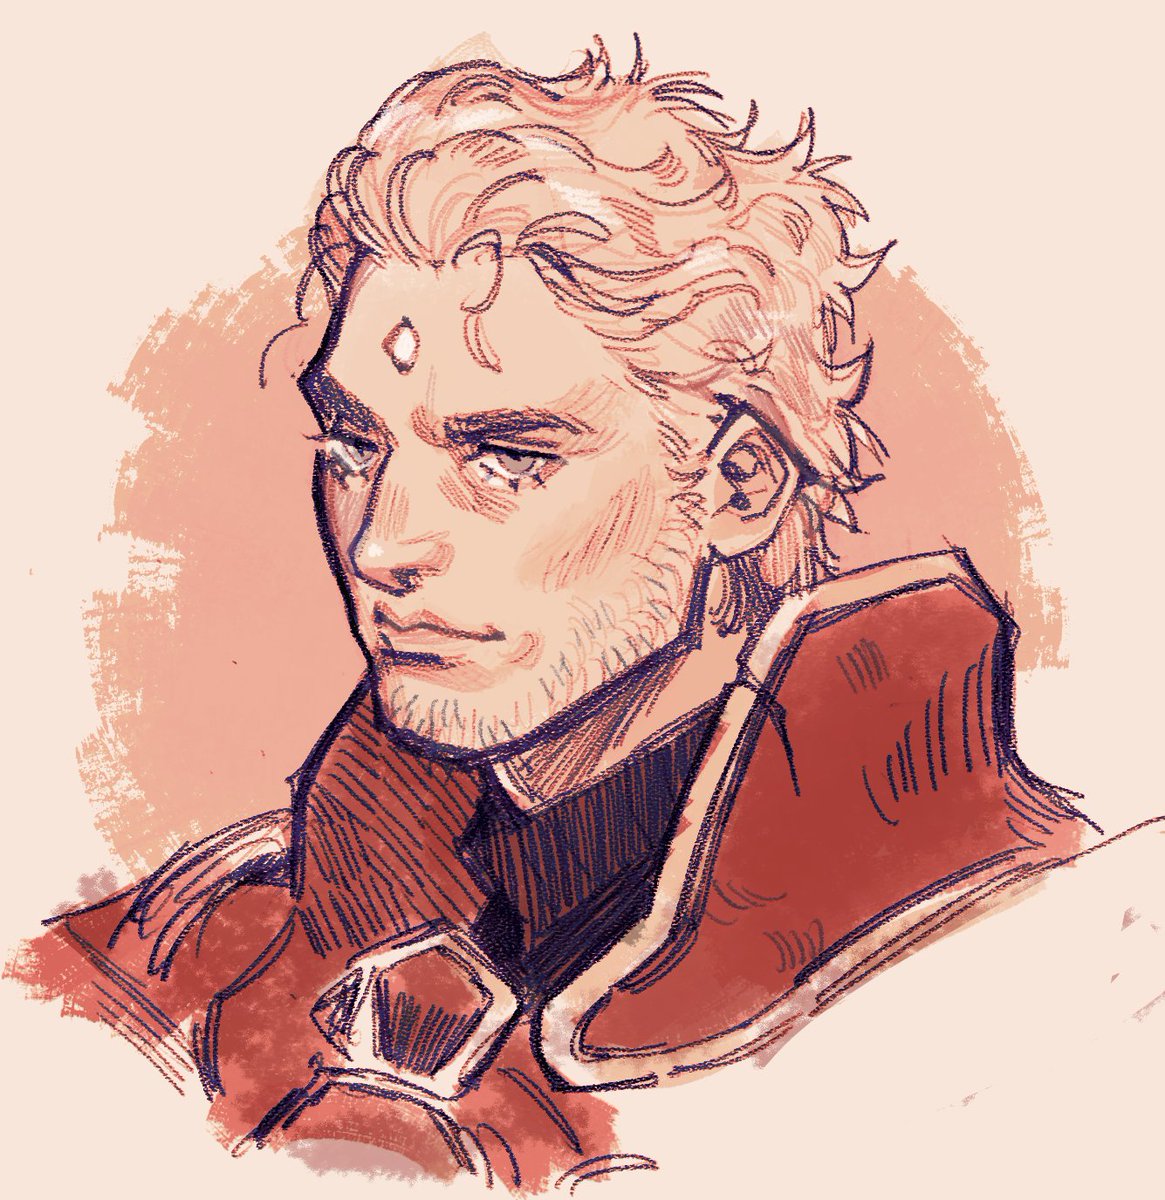 havent played ffxiv for a year or 2 now but i still think of nero sometimes. absolute buffoon